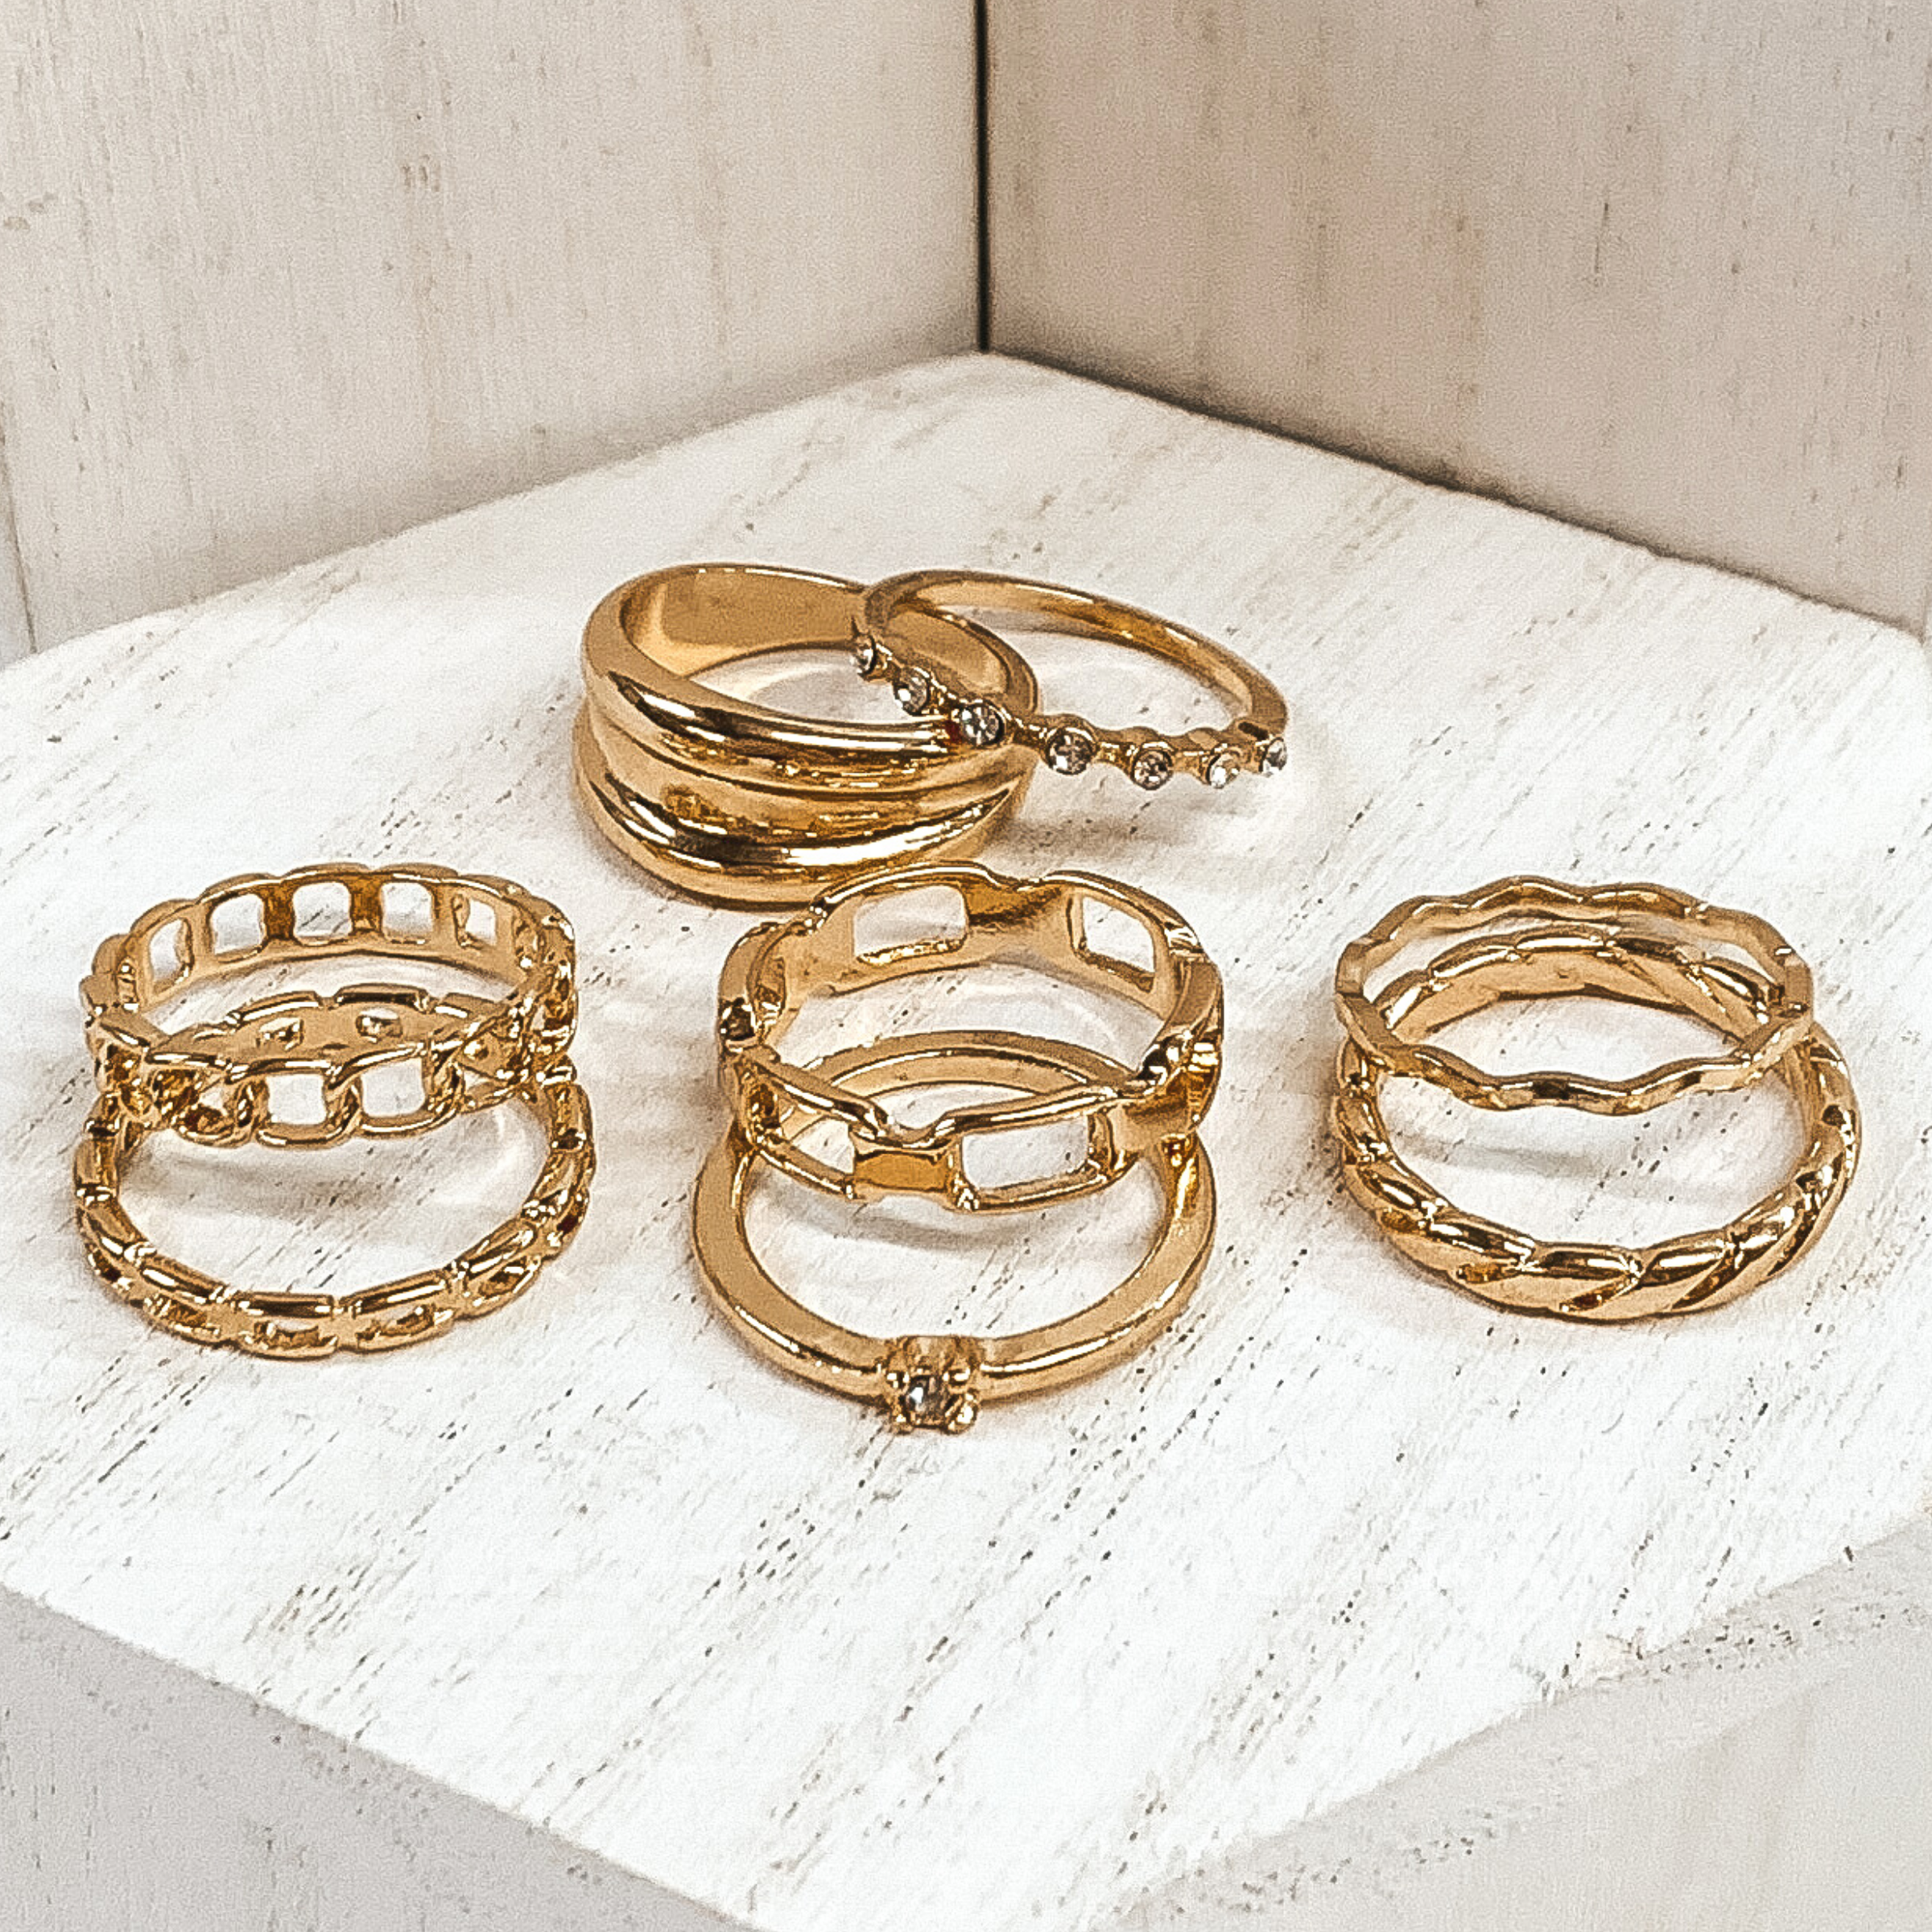 This is a set of eight gold rings. Two of the rings include clear crystals, three rings are different types of chains, one twisted ring, one wavy rings, and one thicker banded ring. This set is pictured on a white background. 